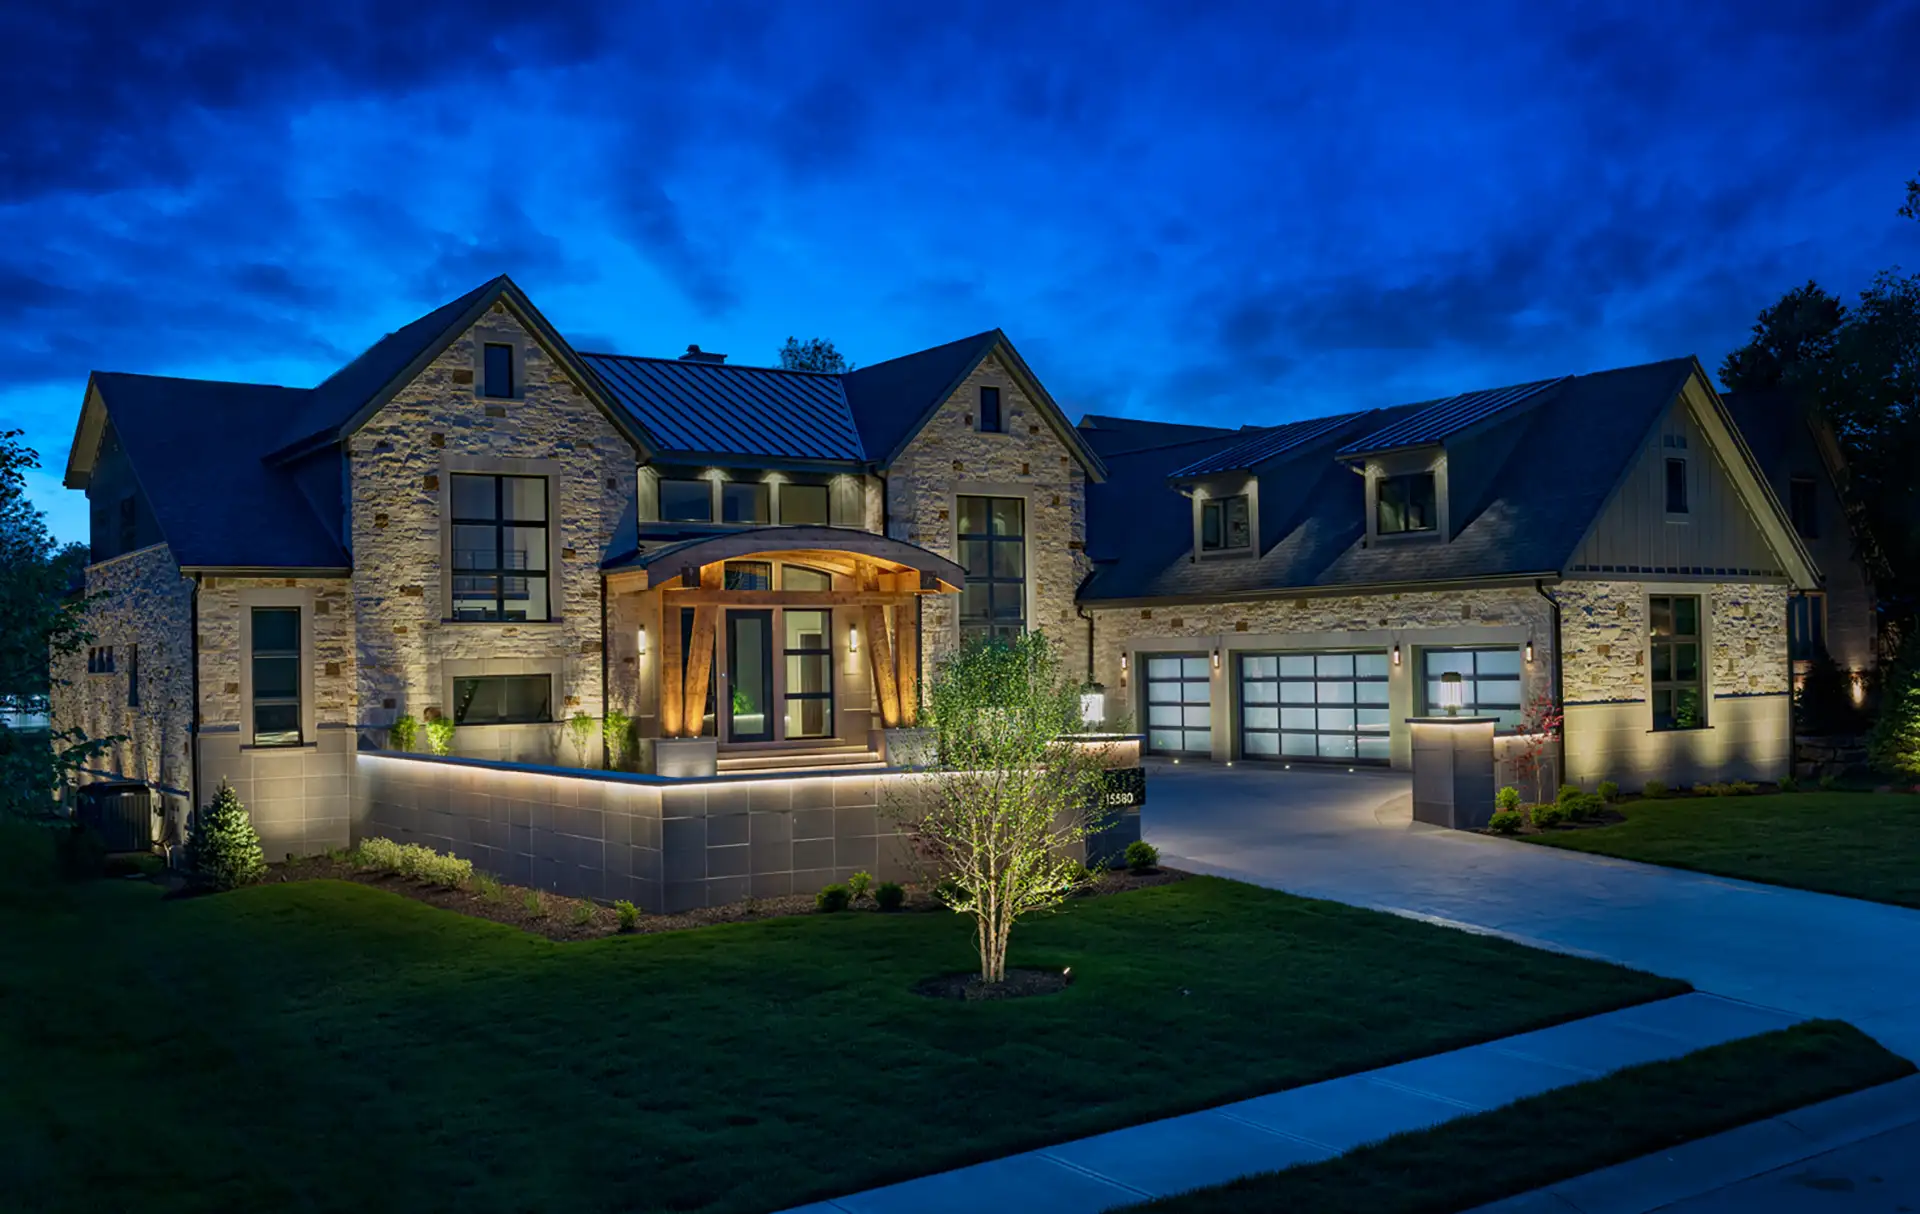 Koenig residence image 3 front elevation Lighthouse Outdoor Lighting and Audio Vail CO